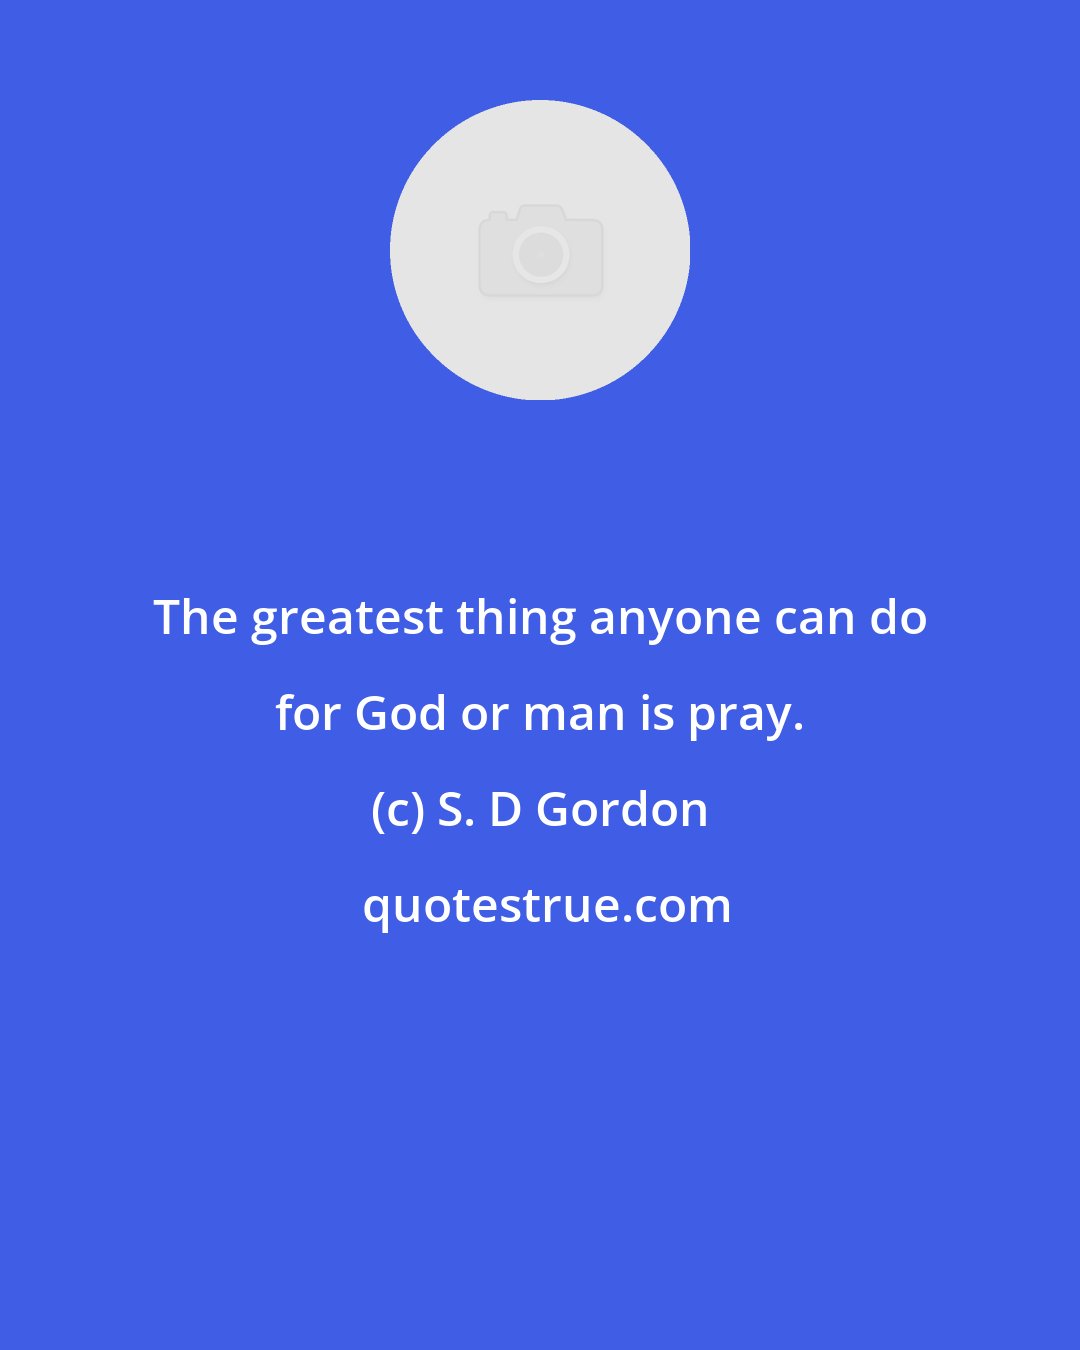 S. D Gordon: The greatest thing anyone can do for God or man is pray.